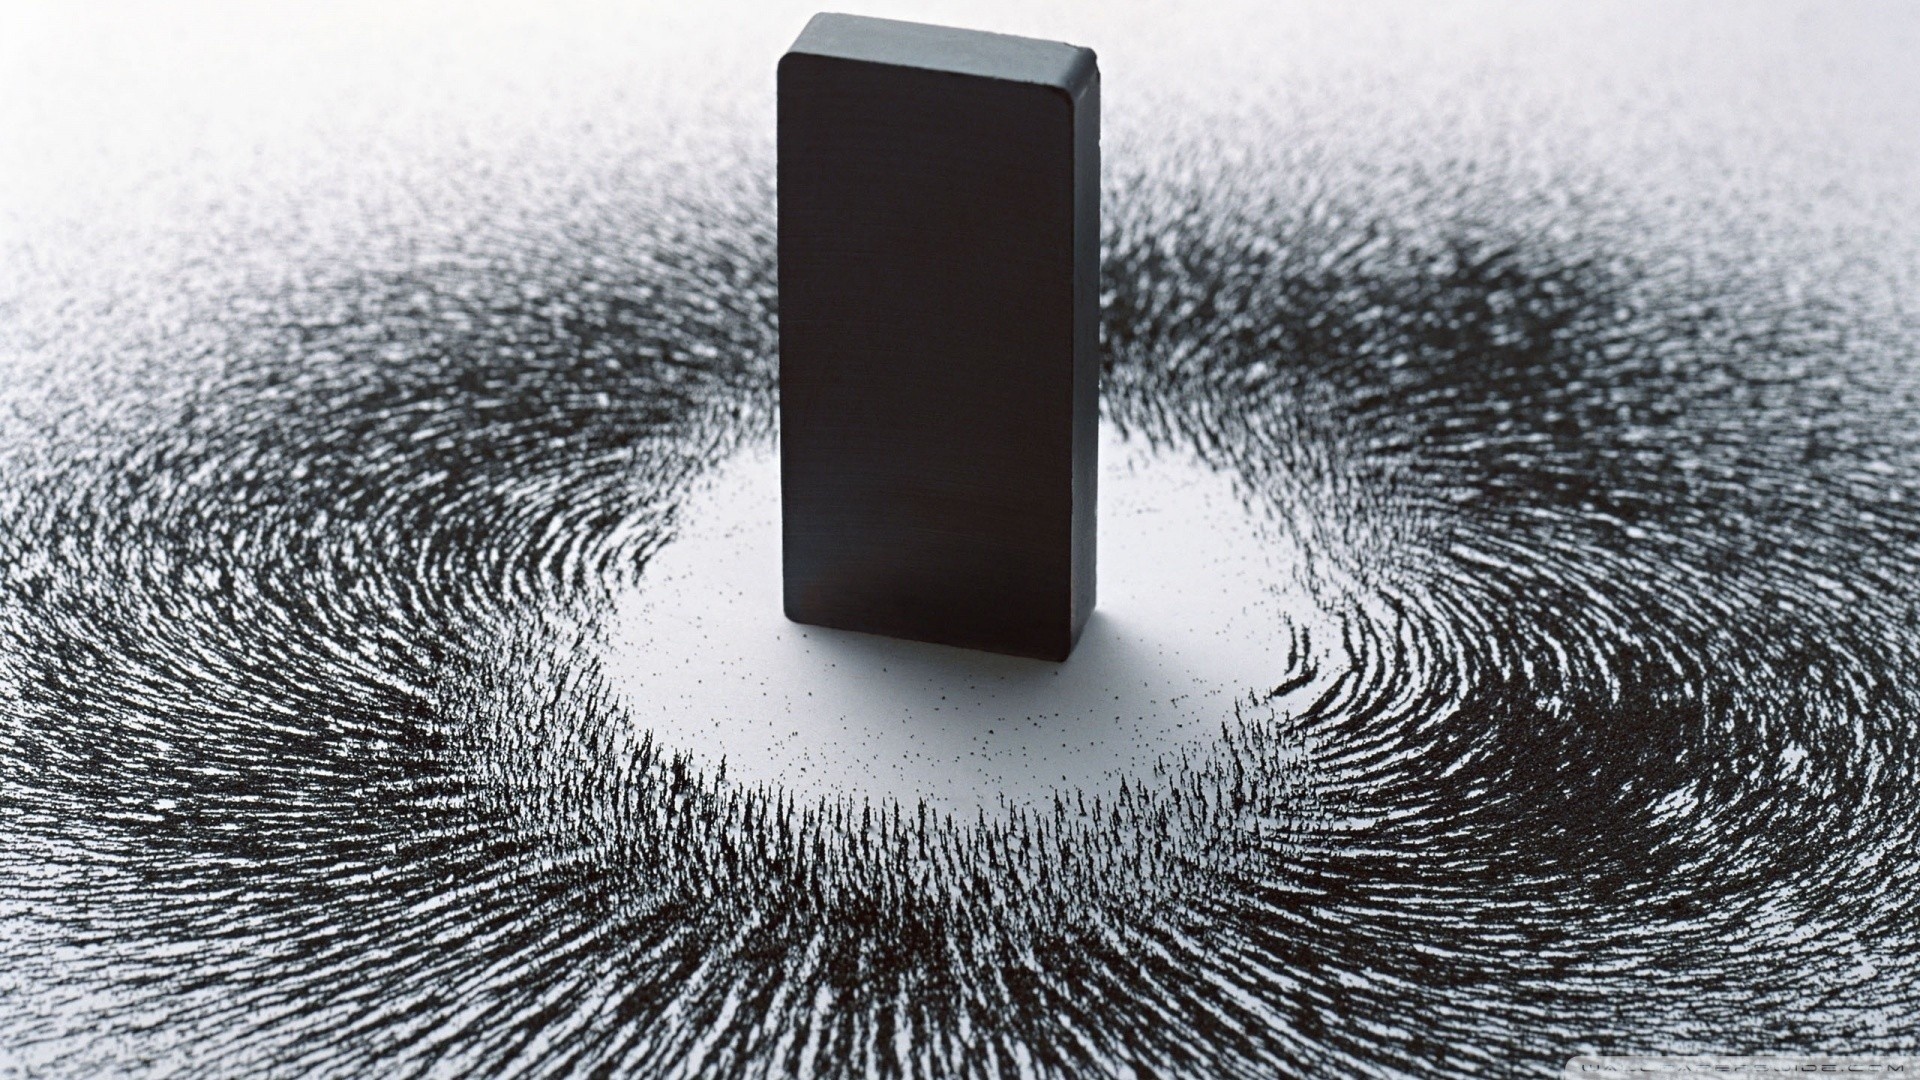 General 1920x1080 magnets Monolith metal monochrome material style digital art